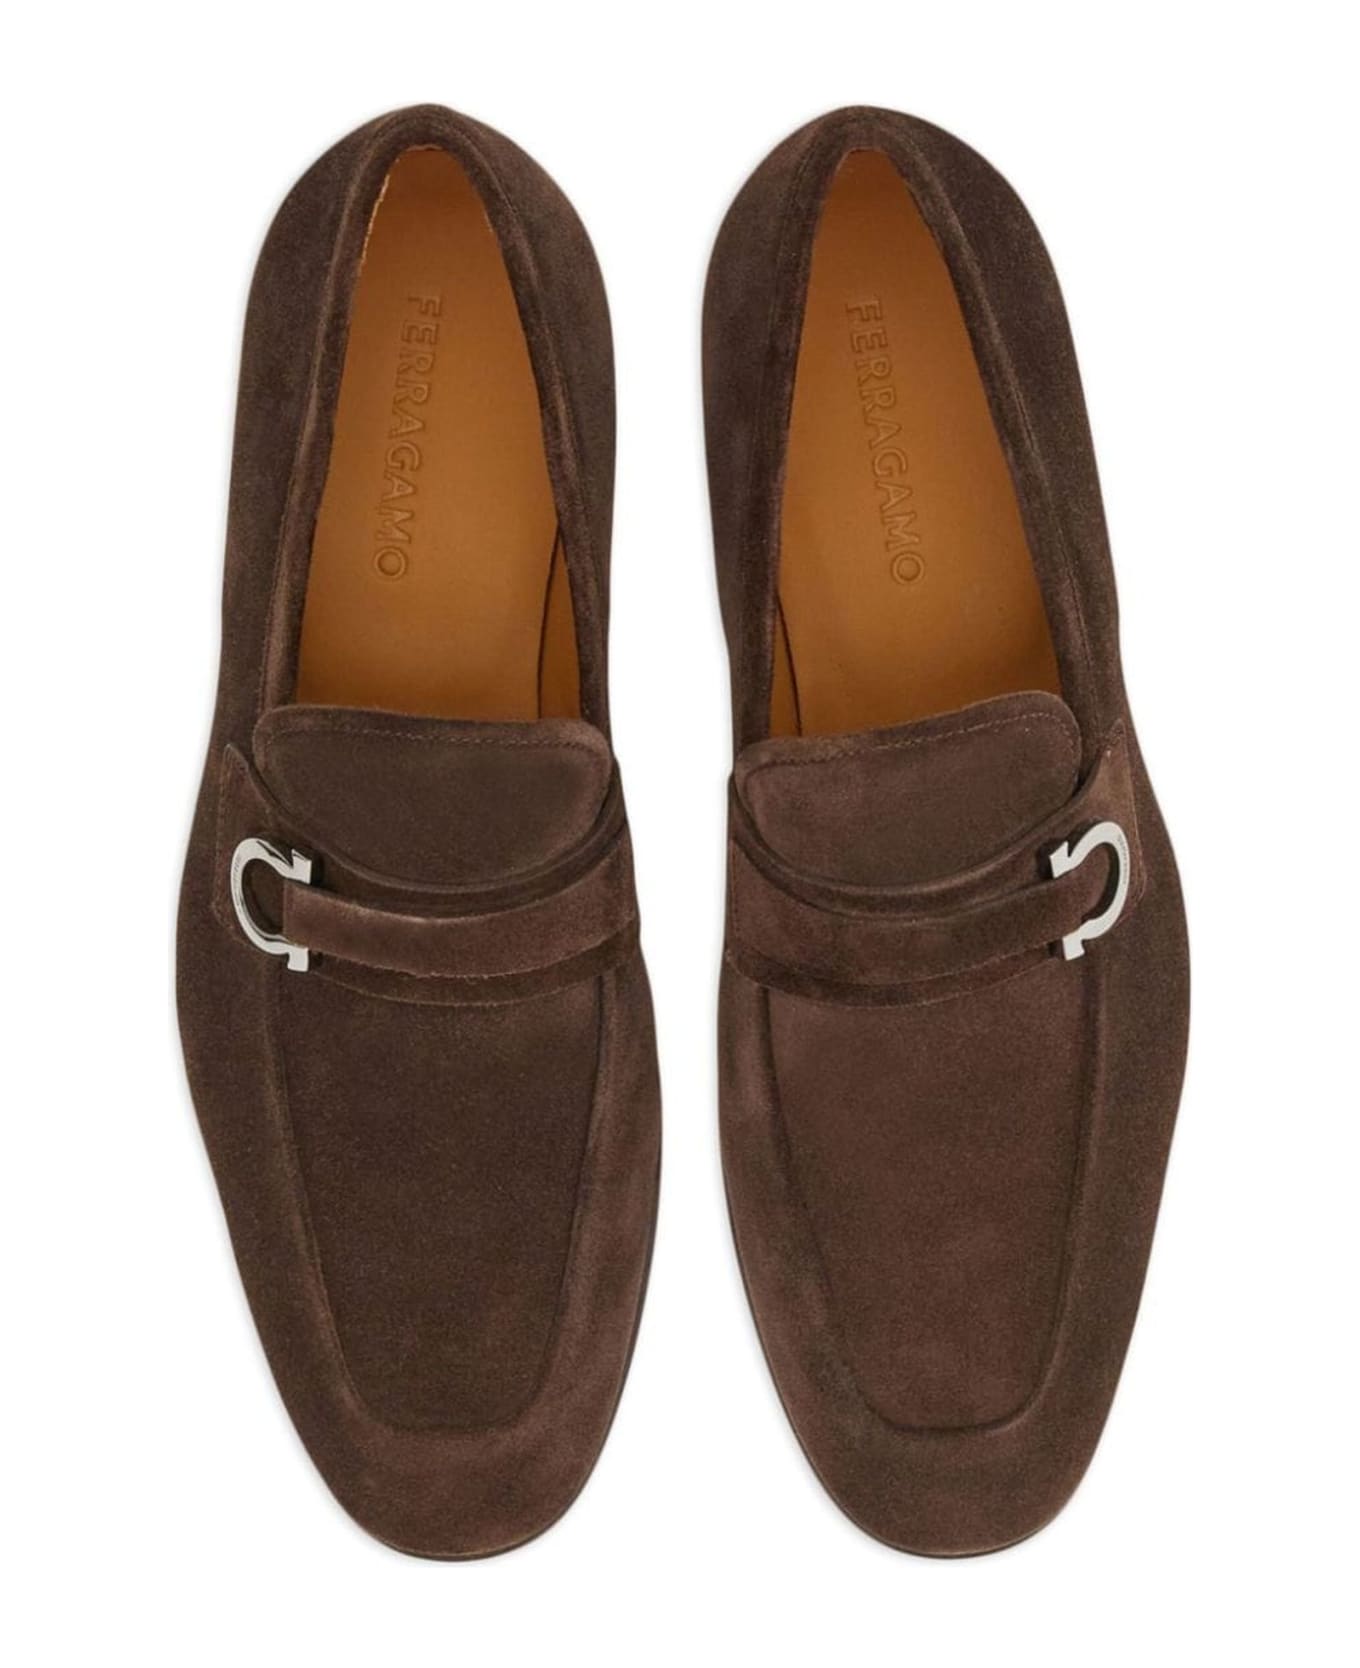 Ferragamo Brown Suede Leather Loafer - Brown